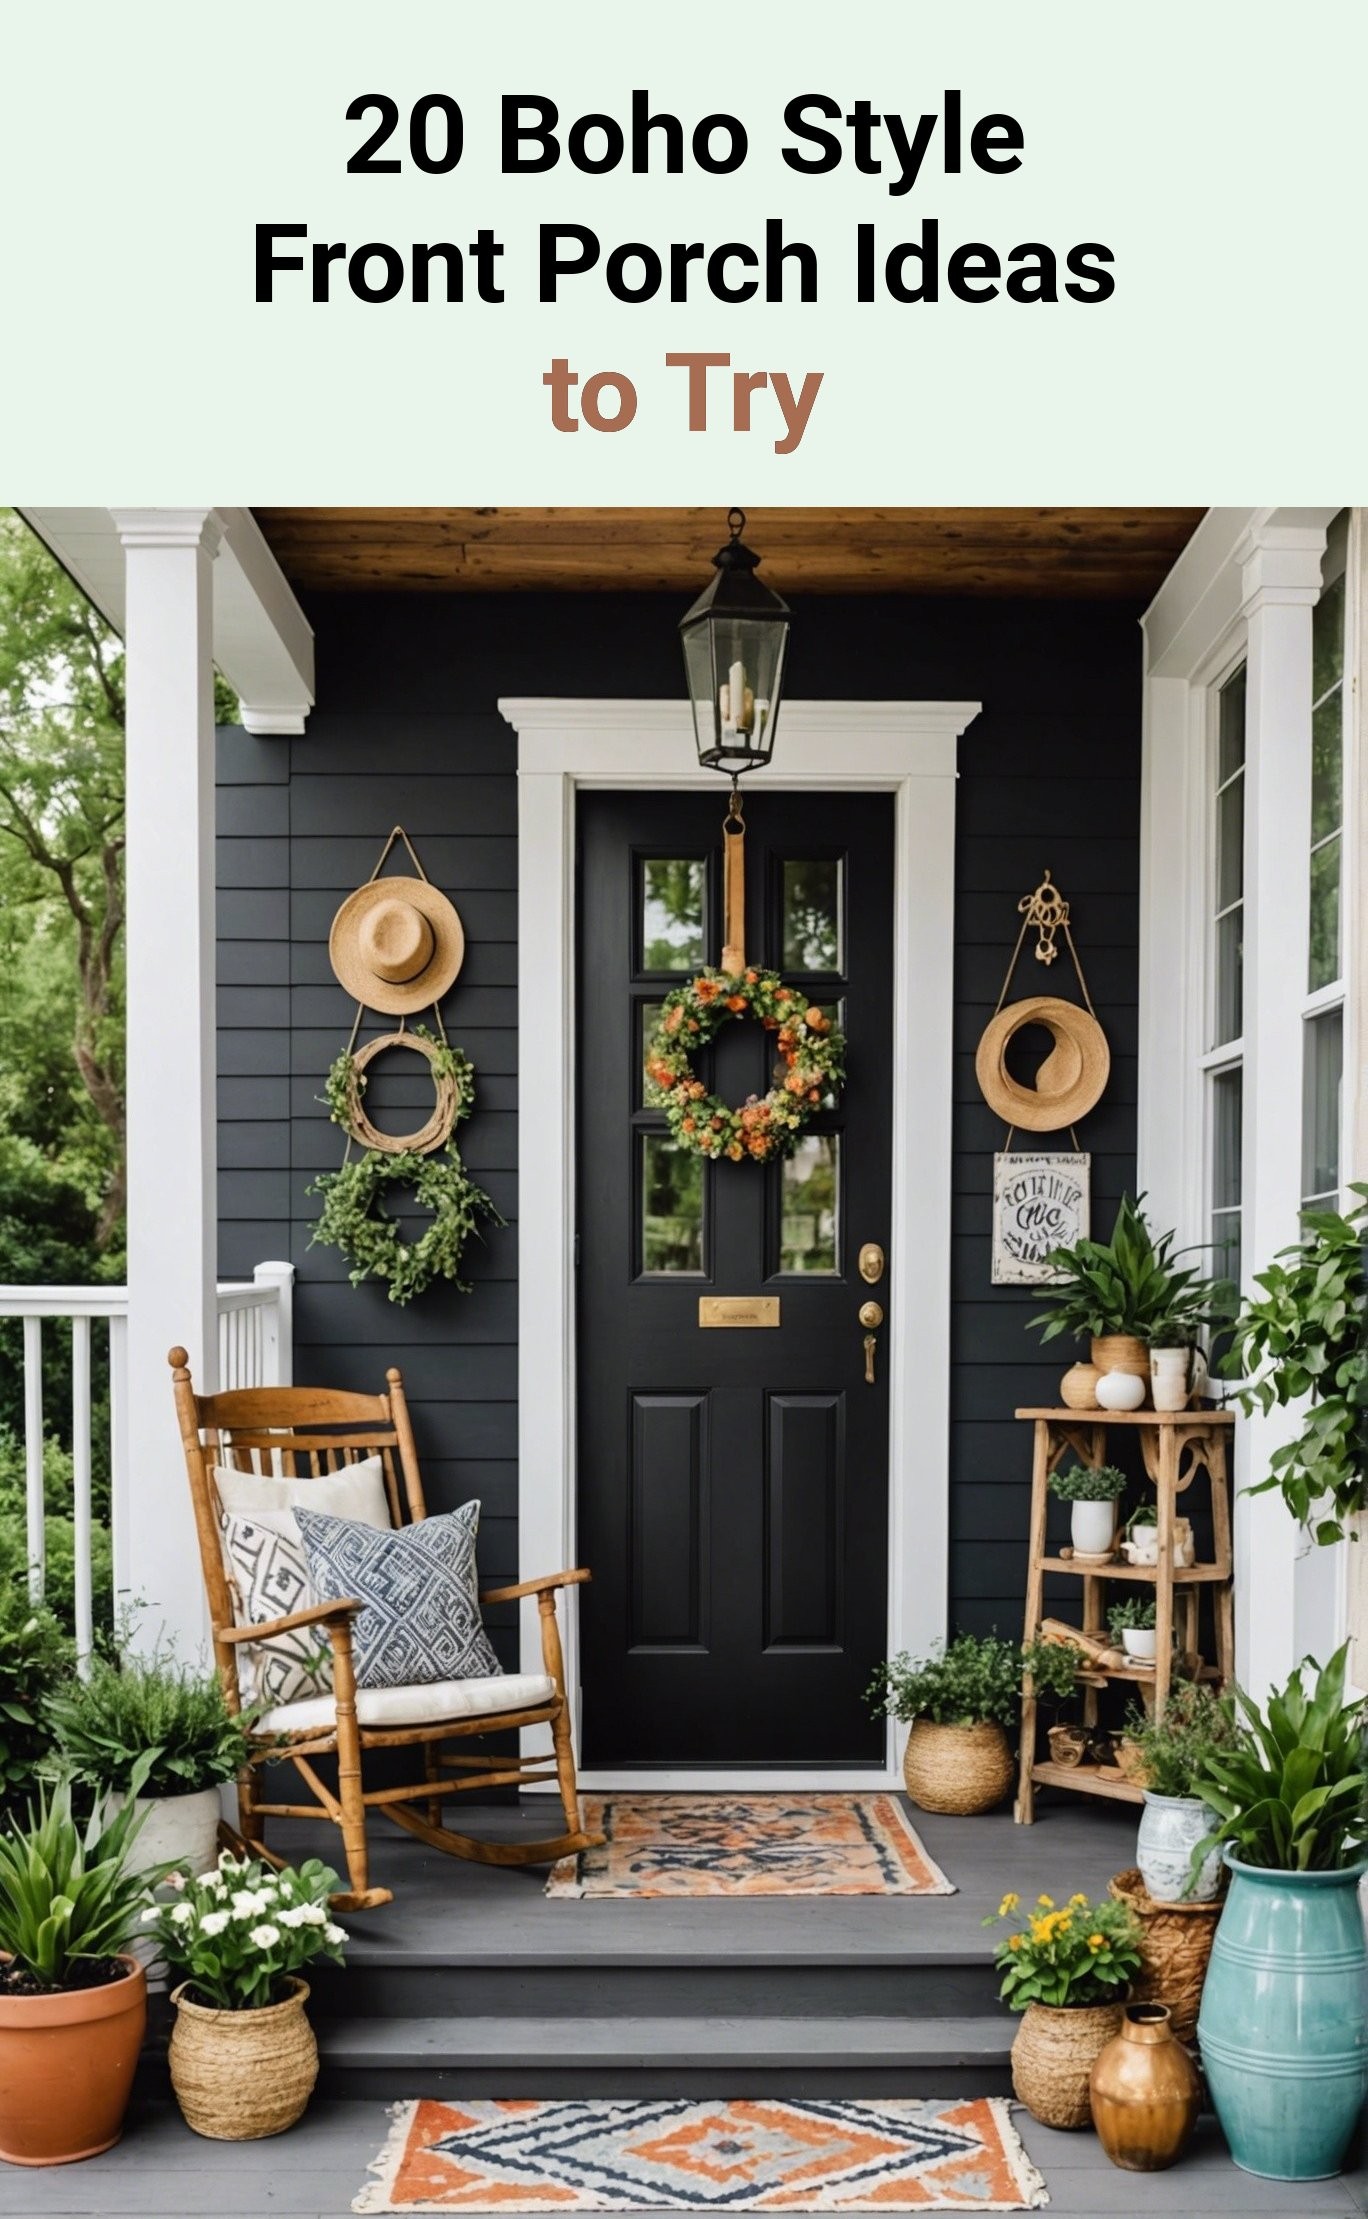 20 Boho Style Front Porch Ideas to Try